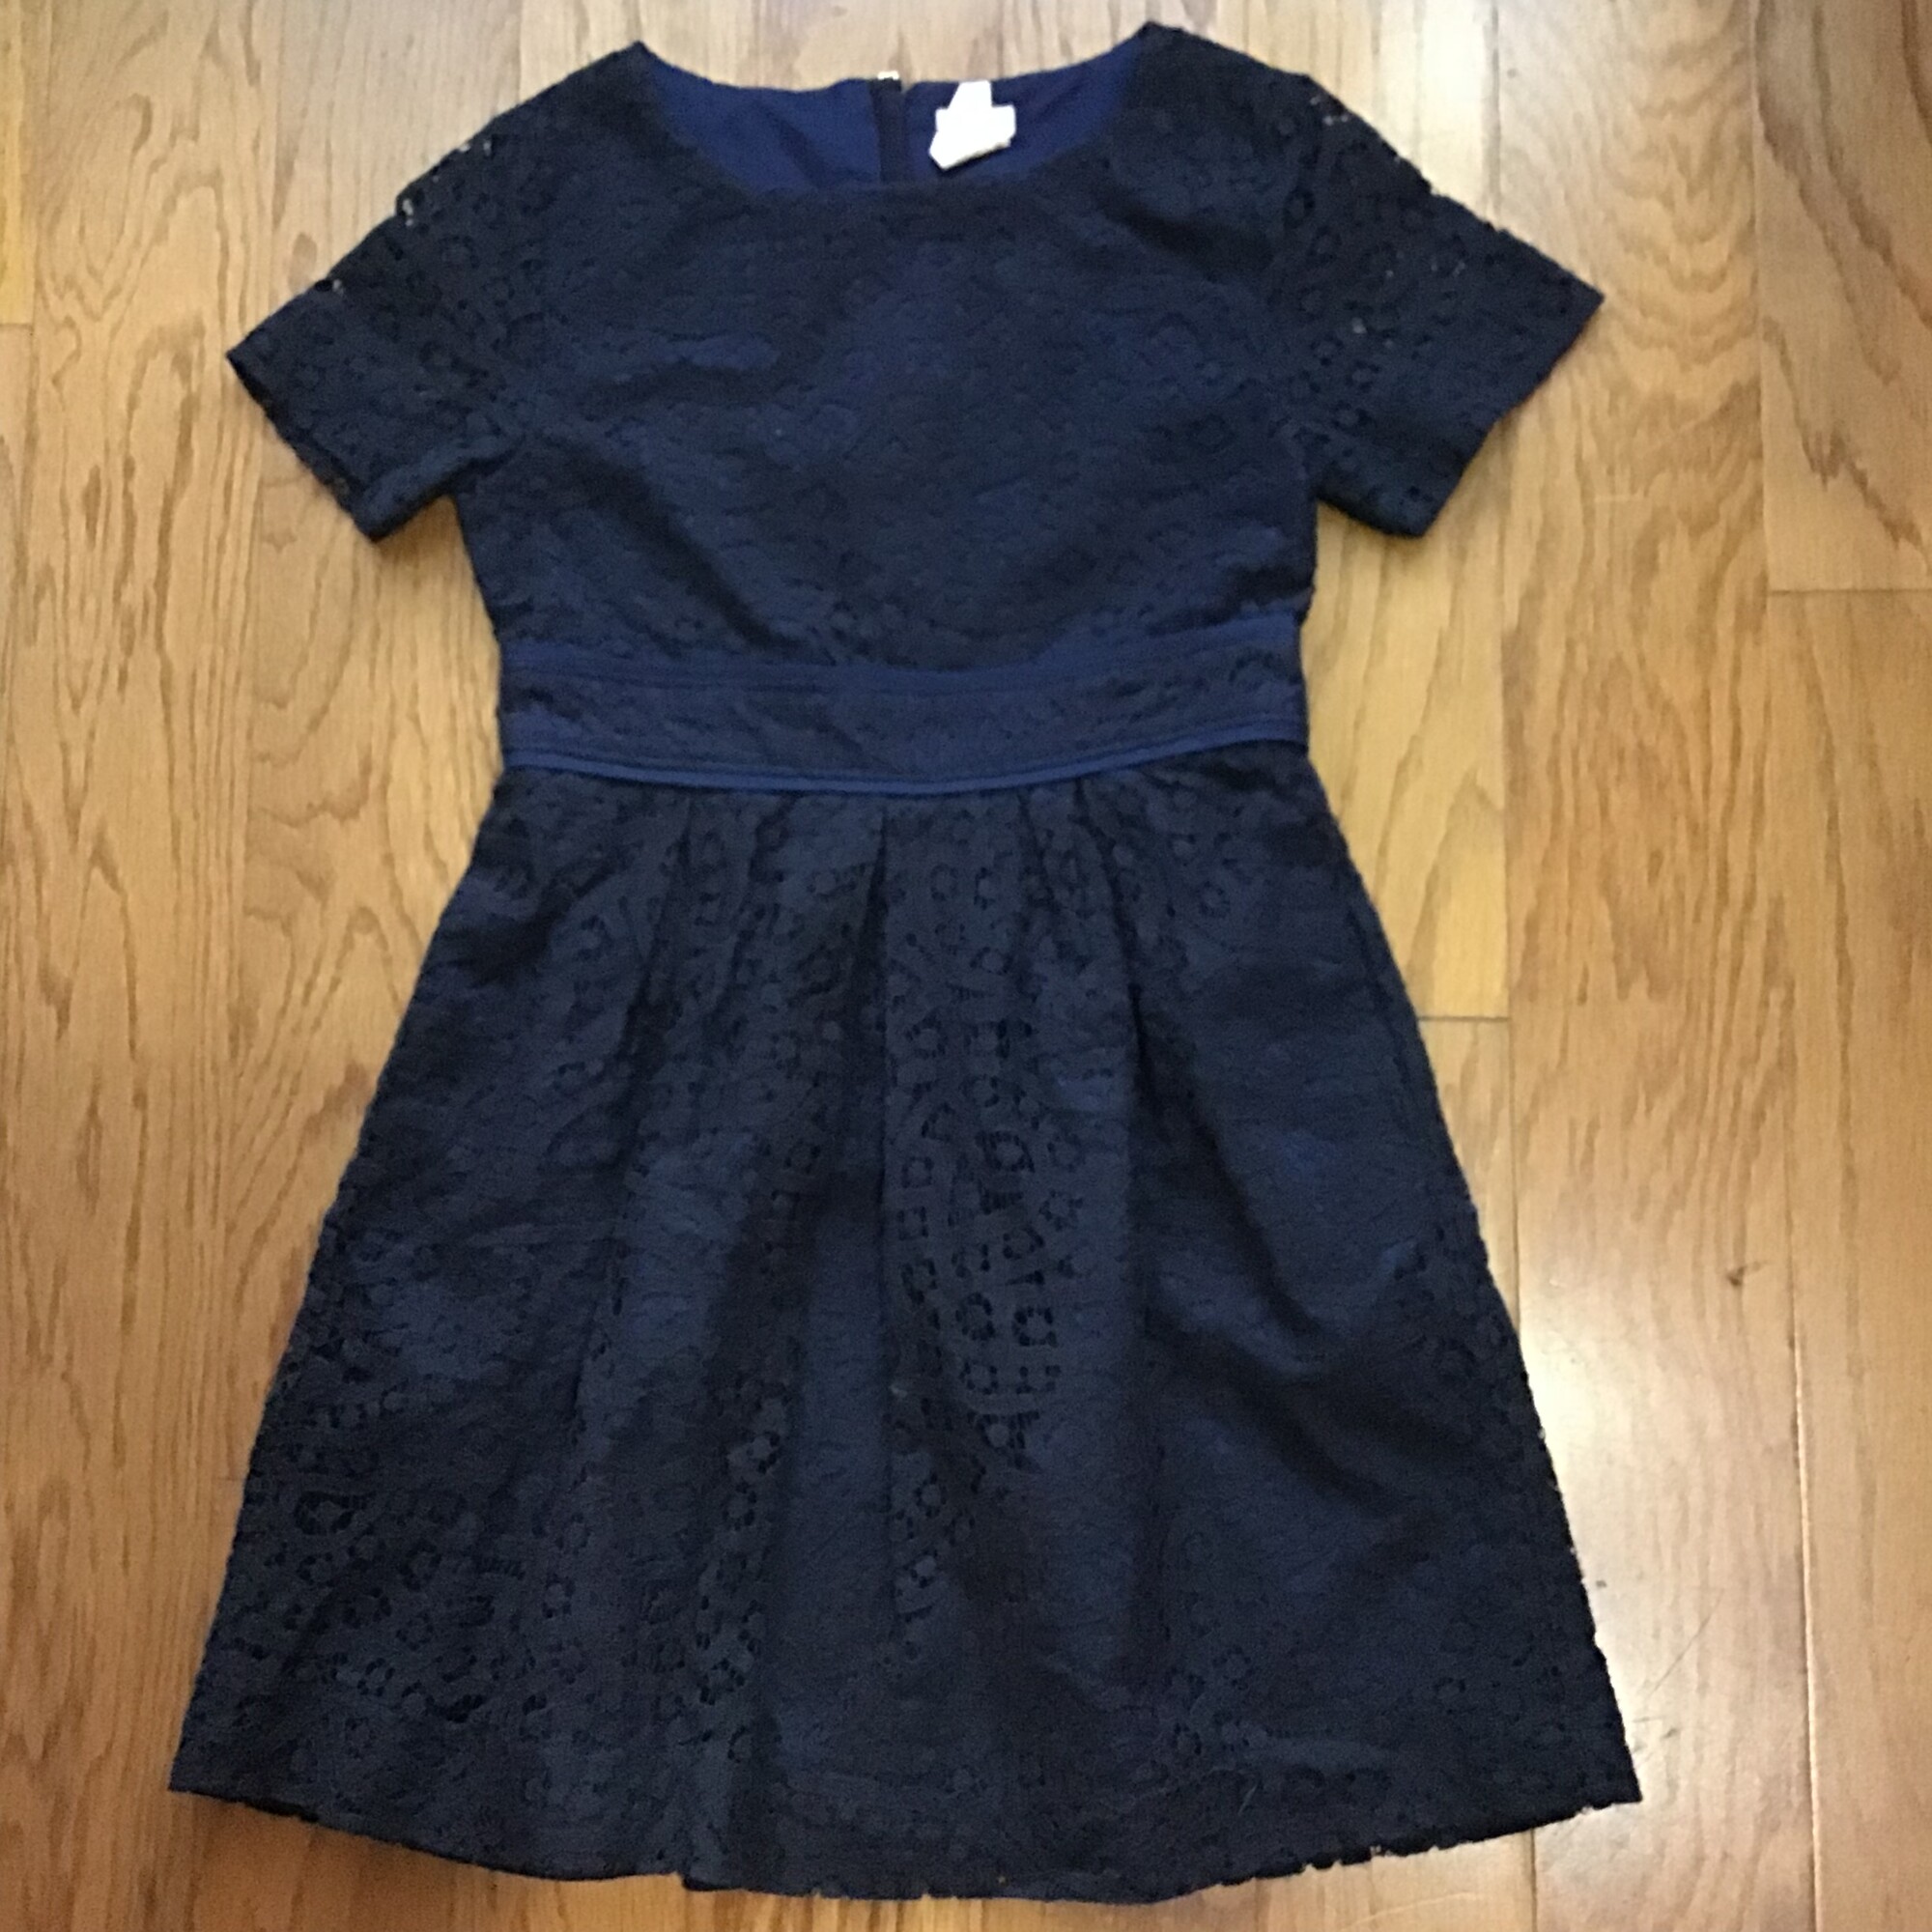 Crewcuts Lace Dress, Navy, Size: 7

ALL ONLINE SALES ARE FINAL.
NO RETURNS
REFUNDS
OR EXCHANGES

PLEASE ALLOW AT LEAST 1 WEEK FOR SHIPMENT. THANK YOU FOR SHOPPING SMALL!